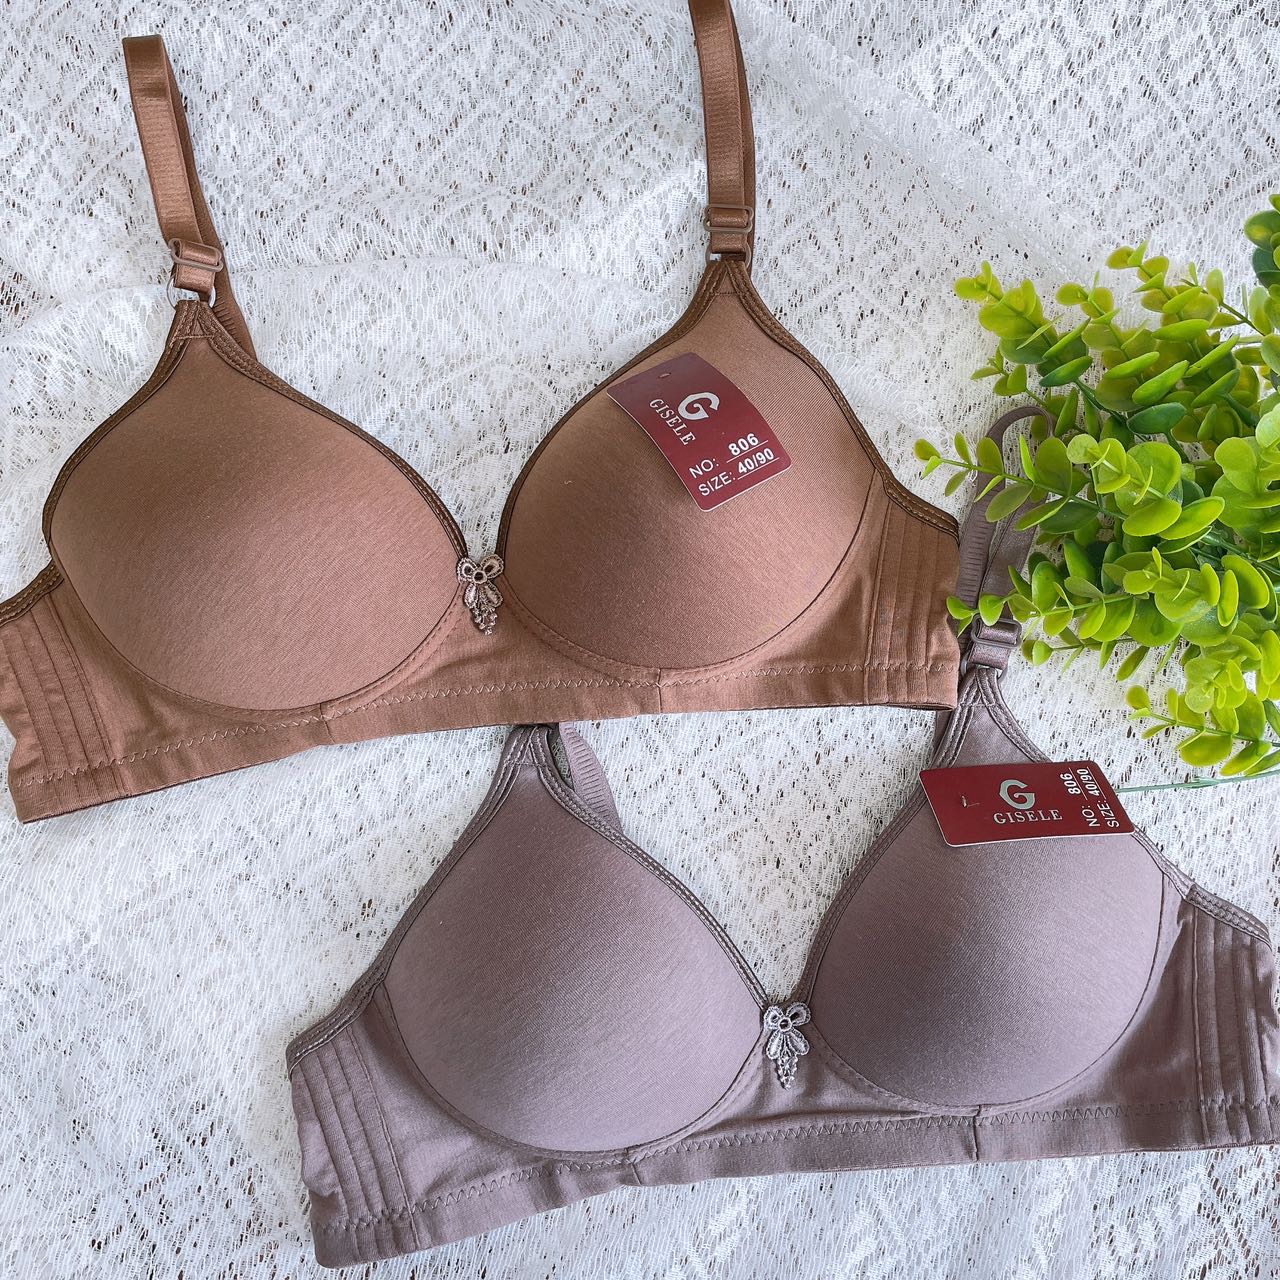 806 wireless bra adjustable strap plain,cotton w/ 2hooks full cup good for  ladies CupB size40-44